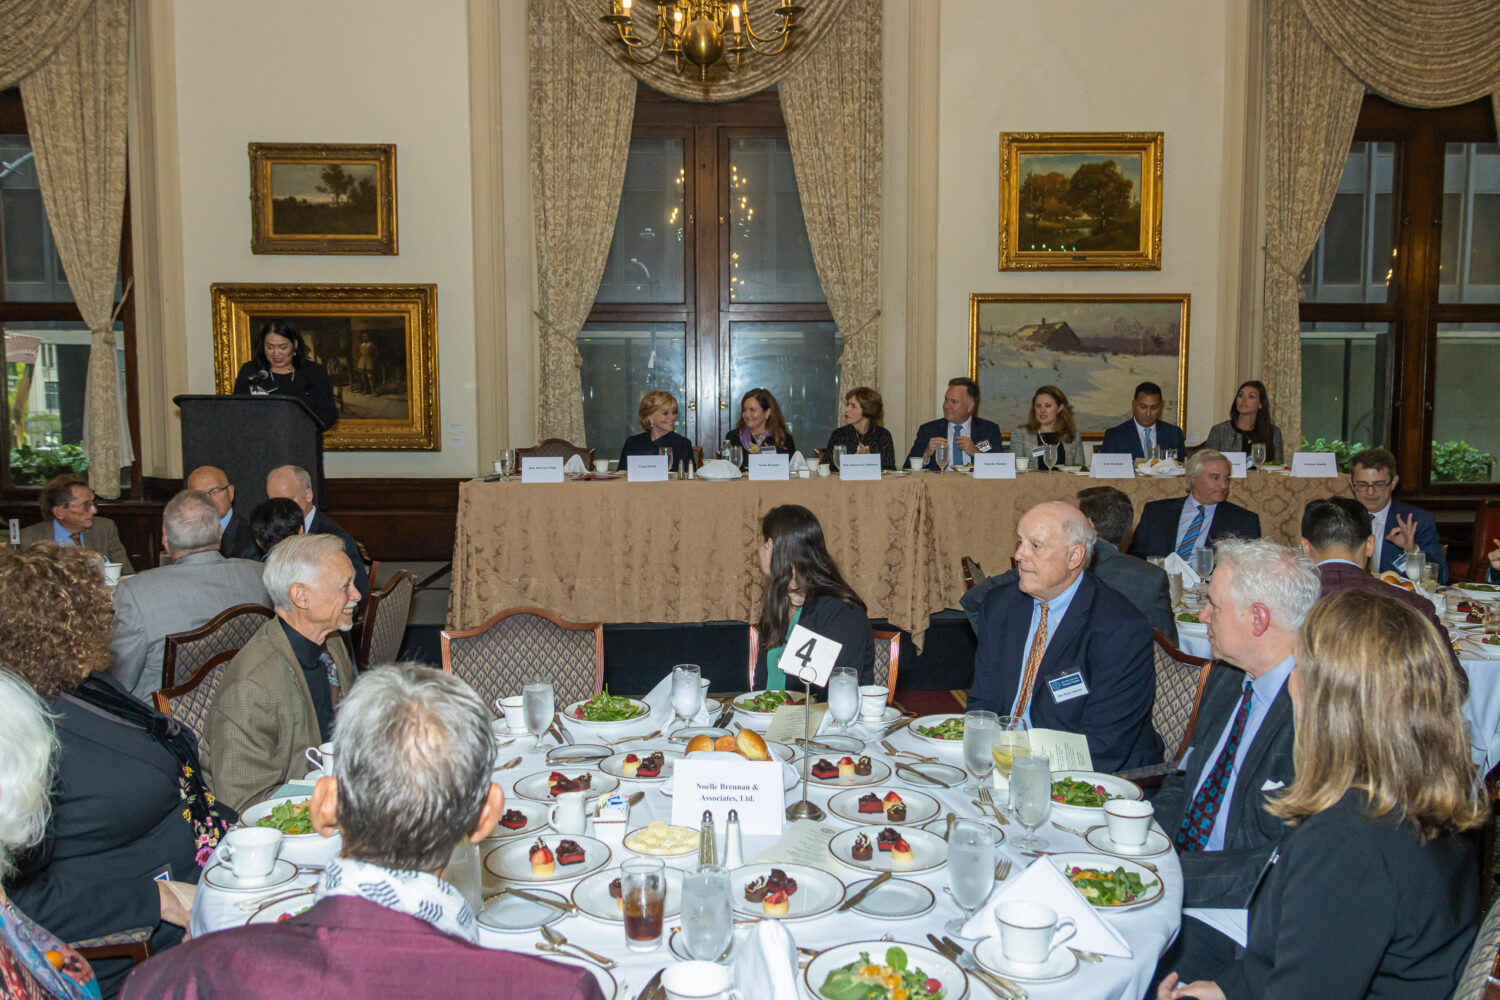 Chicago Chapter Of The Federal Bar Association Hosts Annual Meeting And Installation Luncheon At The Union League Club